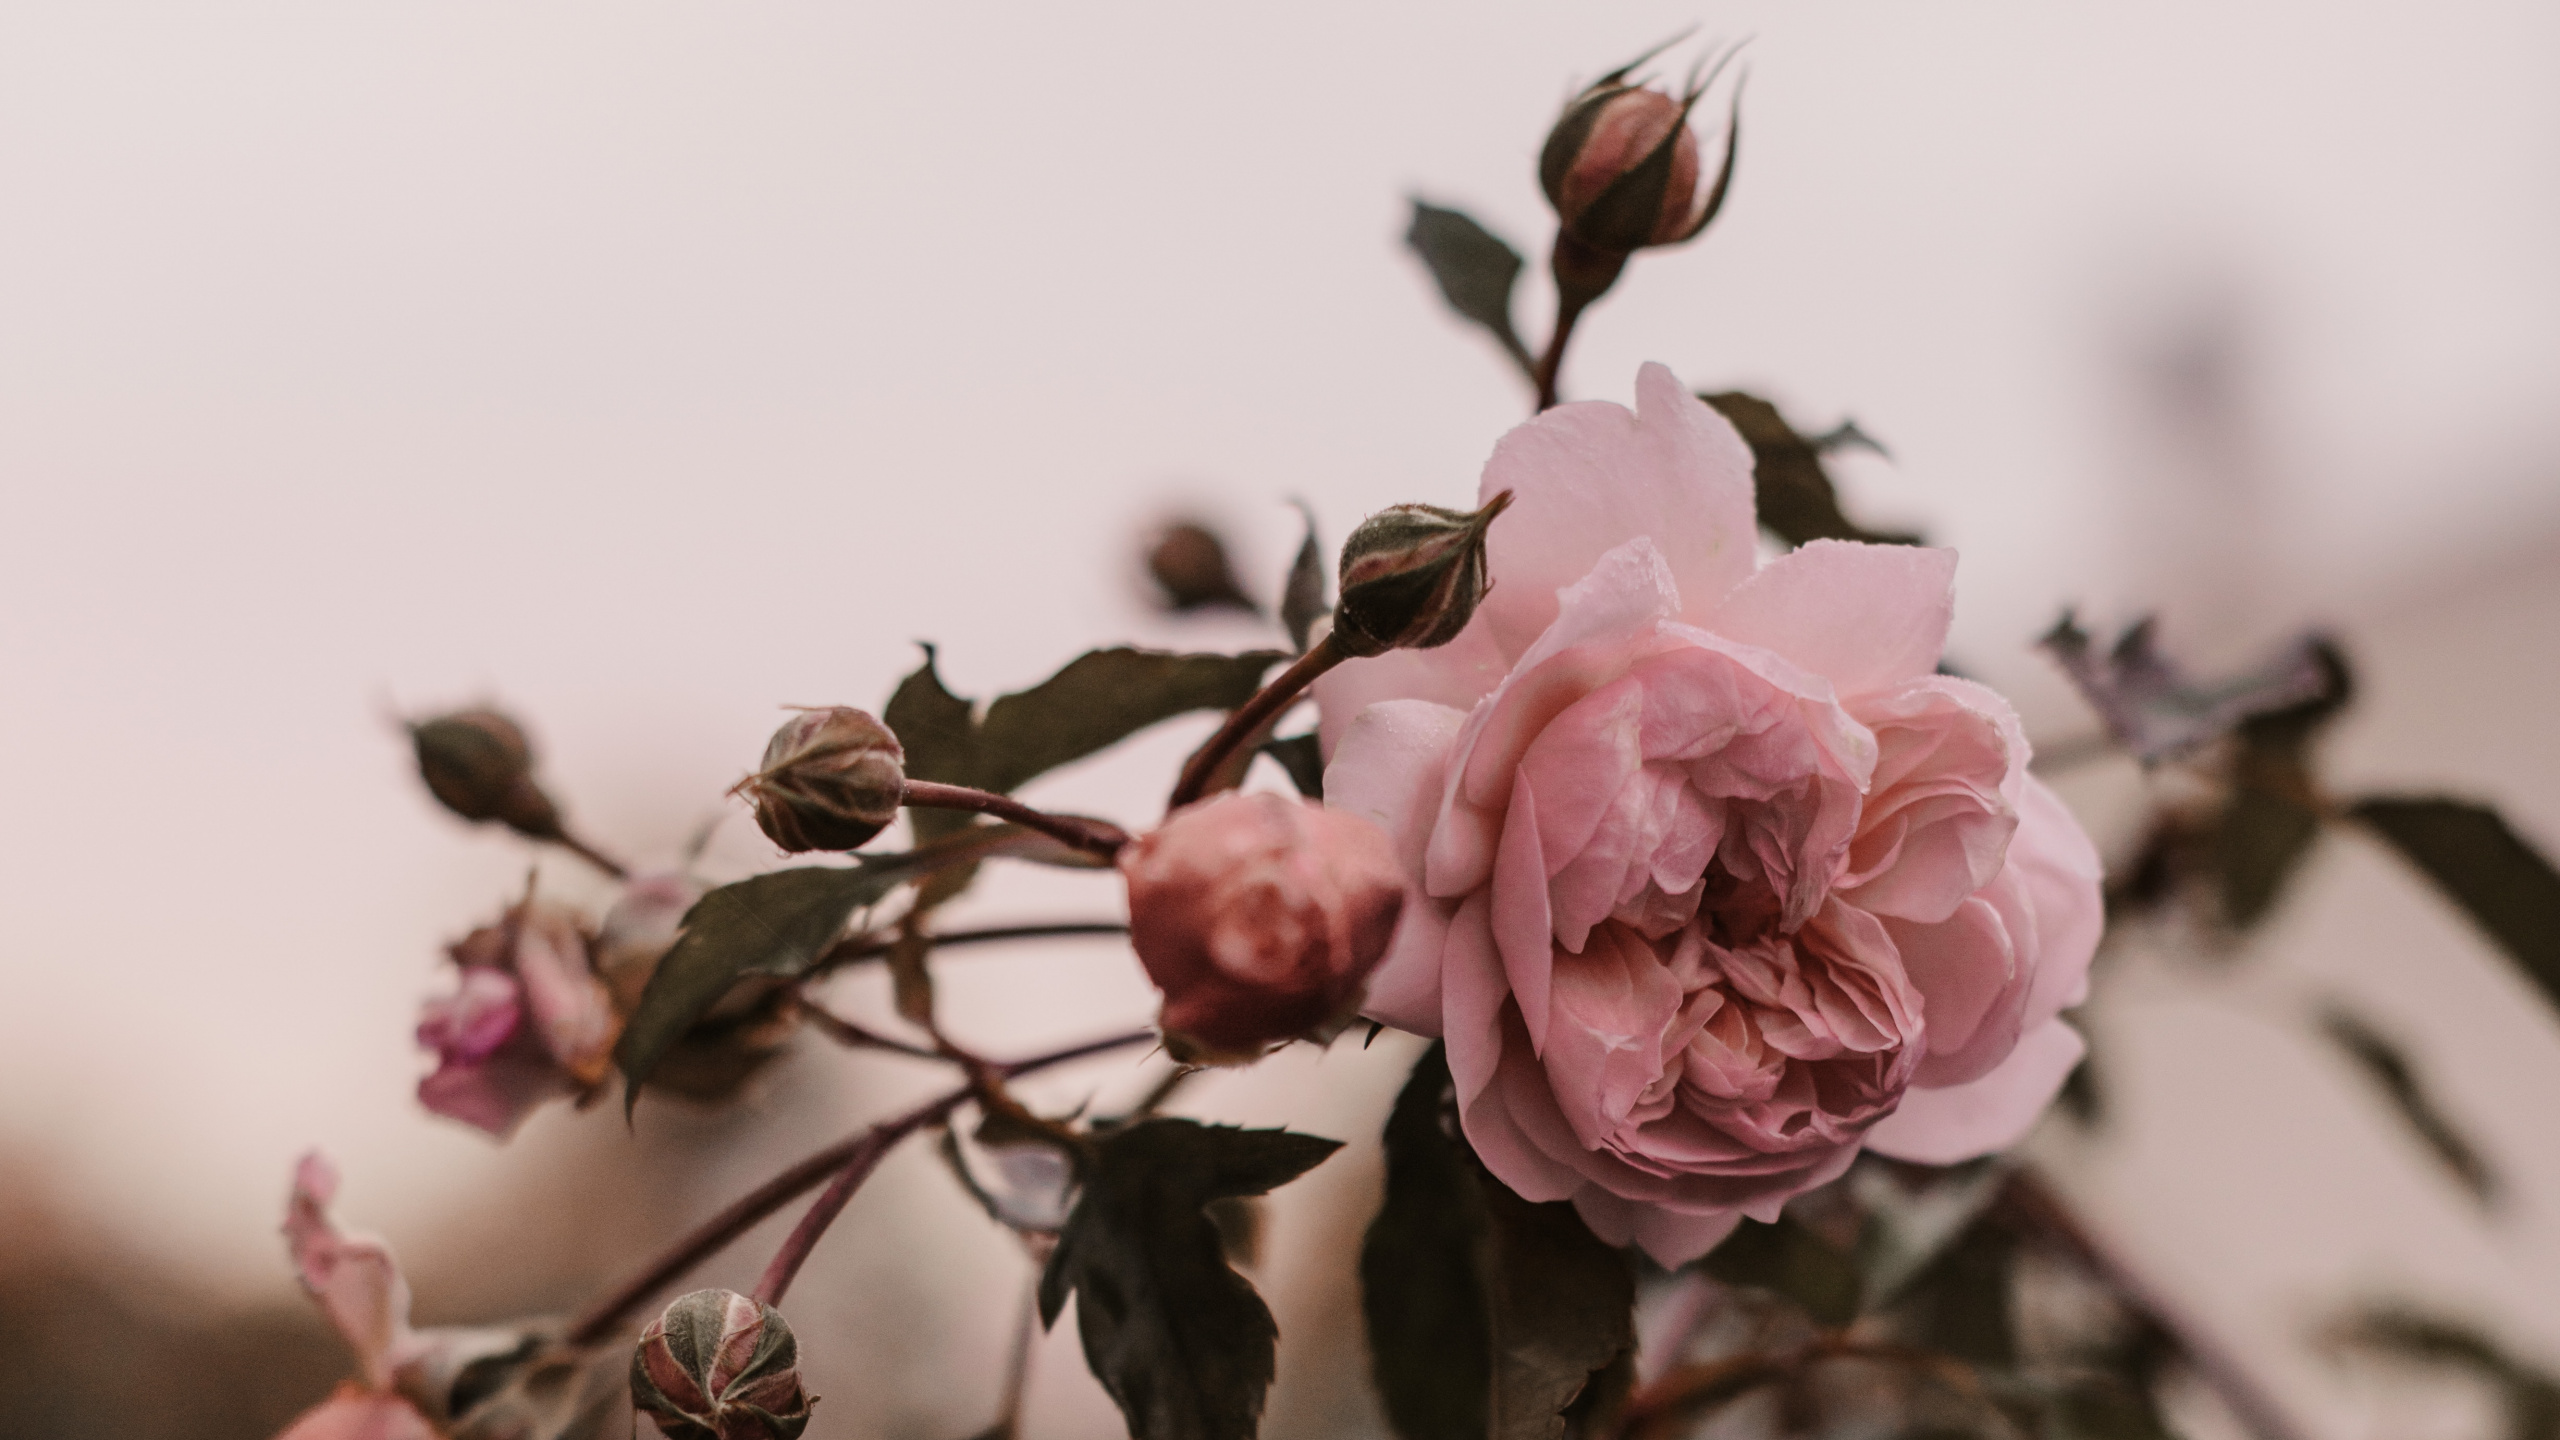 Pink Roses in Bloom During Daytime. Wallpaper in 2560x1440 Resolution